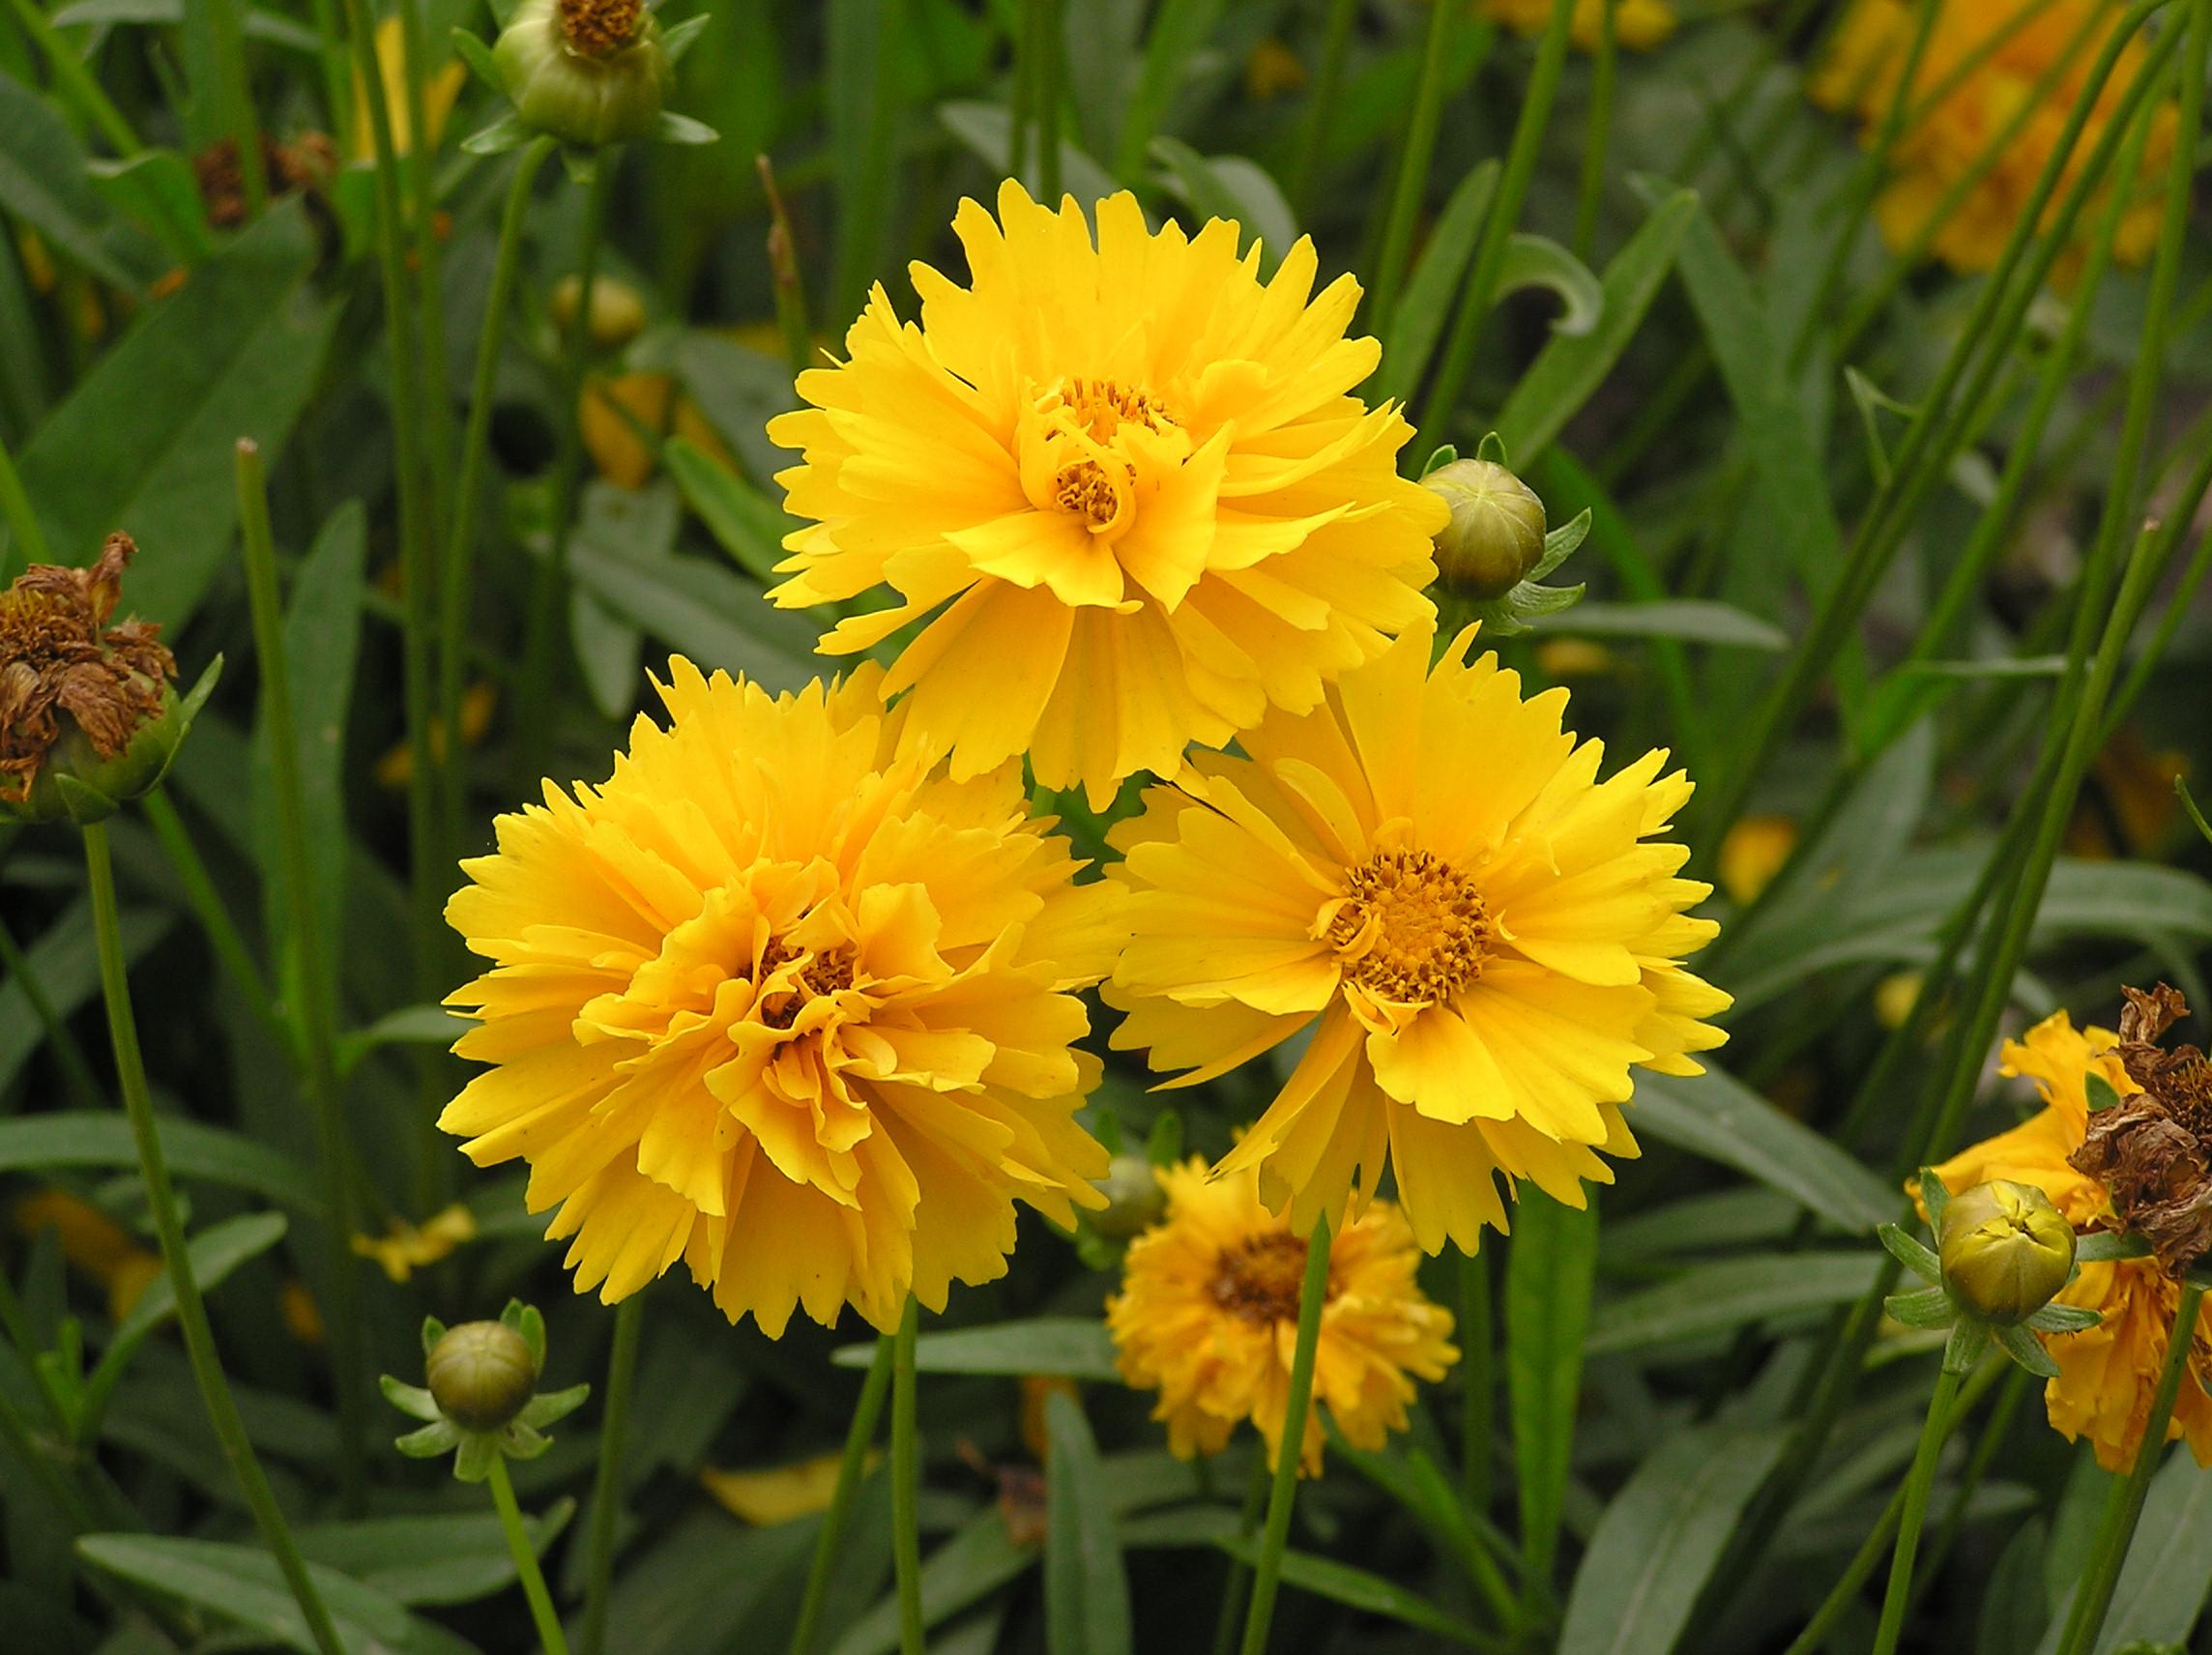 yellow flowers with brown-yellow center, yellow-green buds, green leaves and stems